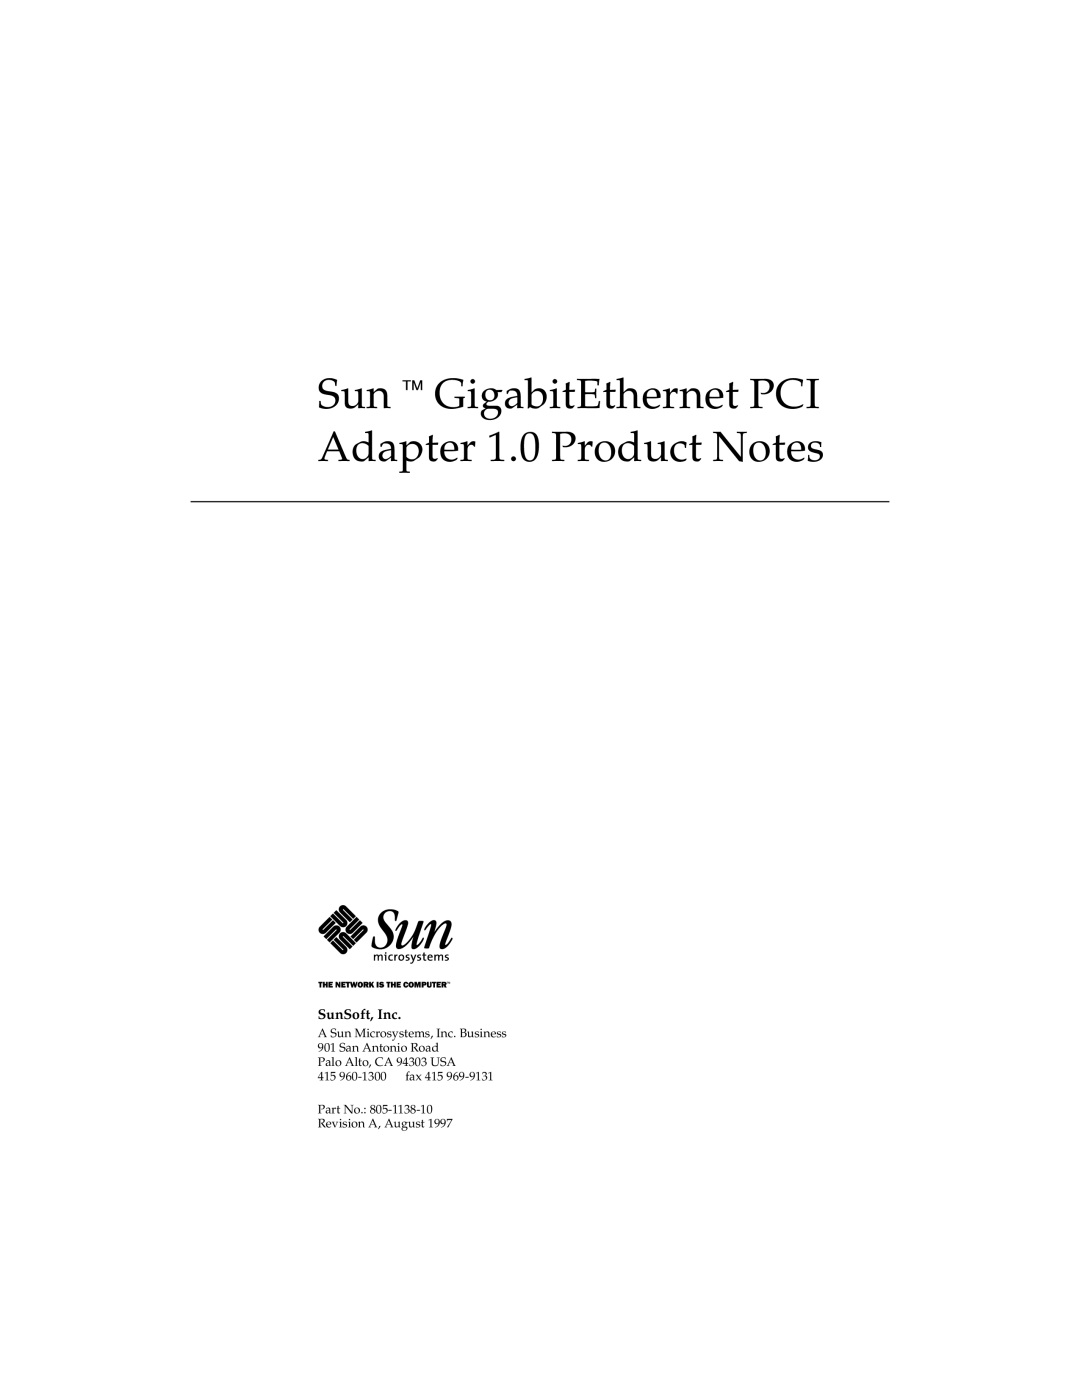 Sun Microsystems manual Sun GigabitEthernet PCI Adapter 1.0 Product Notes, SunSoft, Inc, Revision A, August 